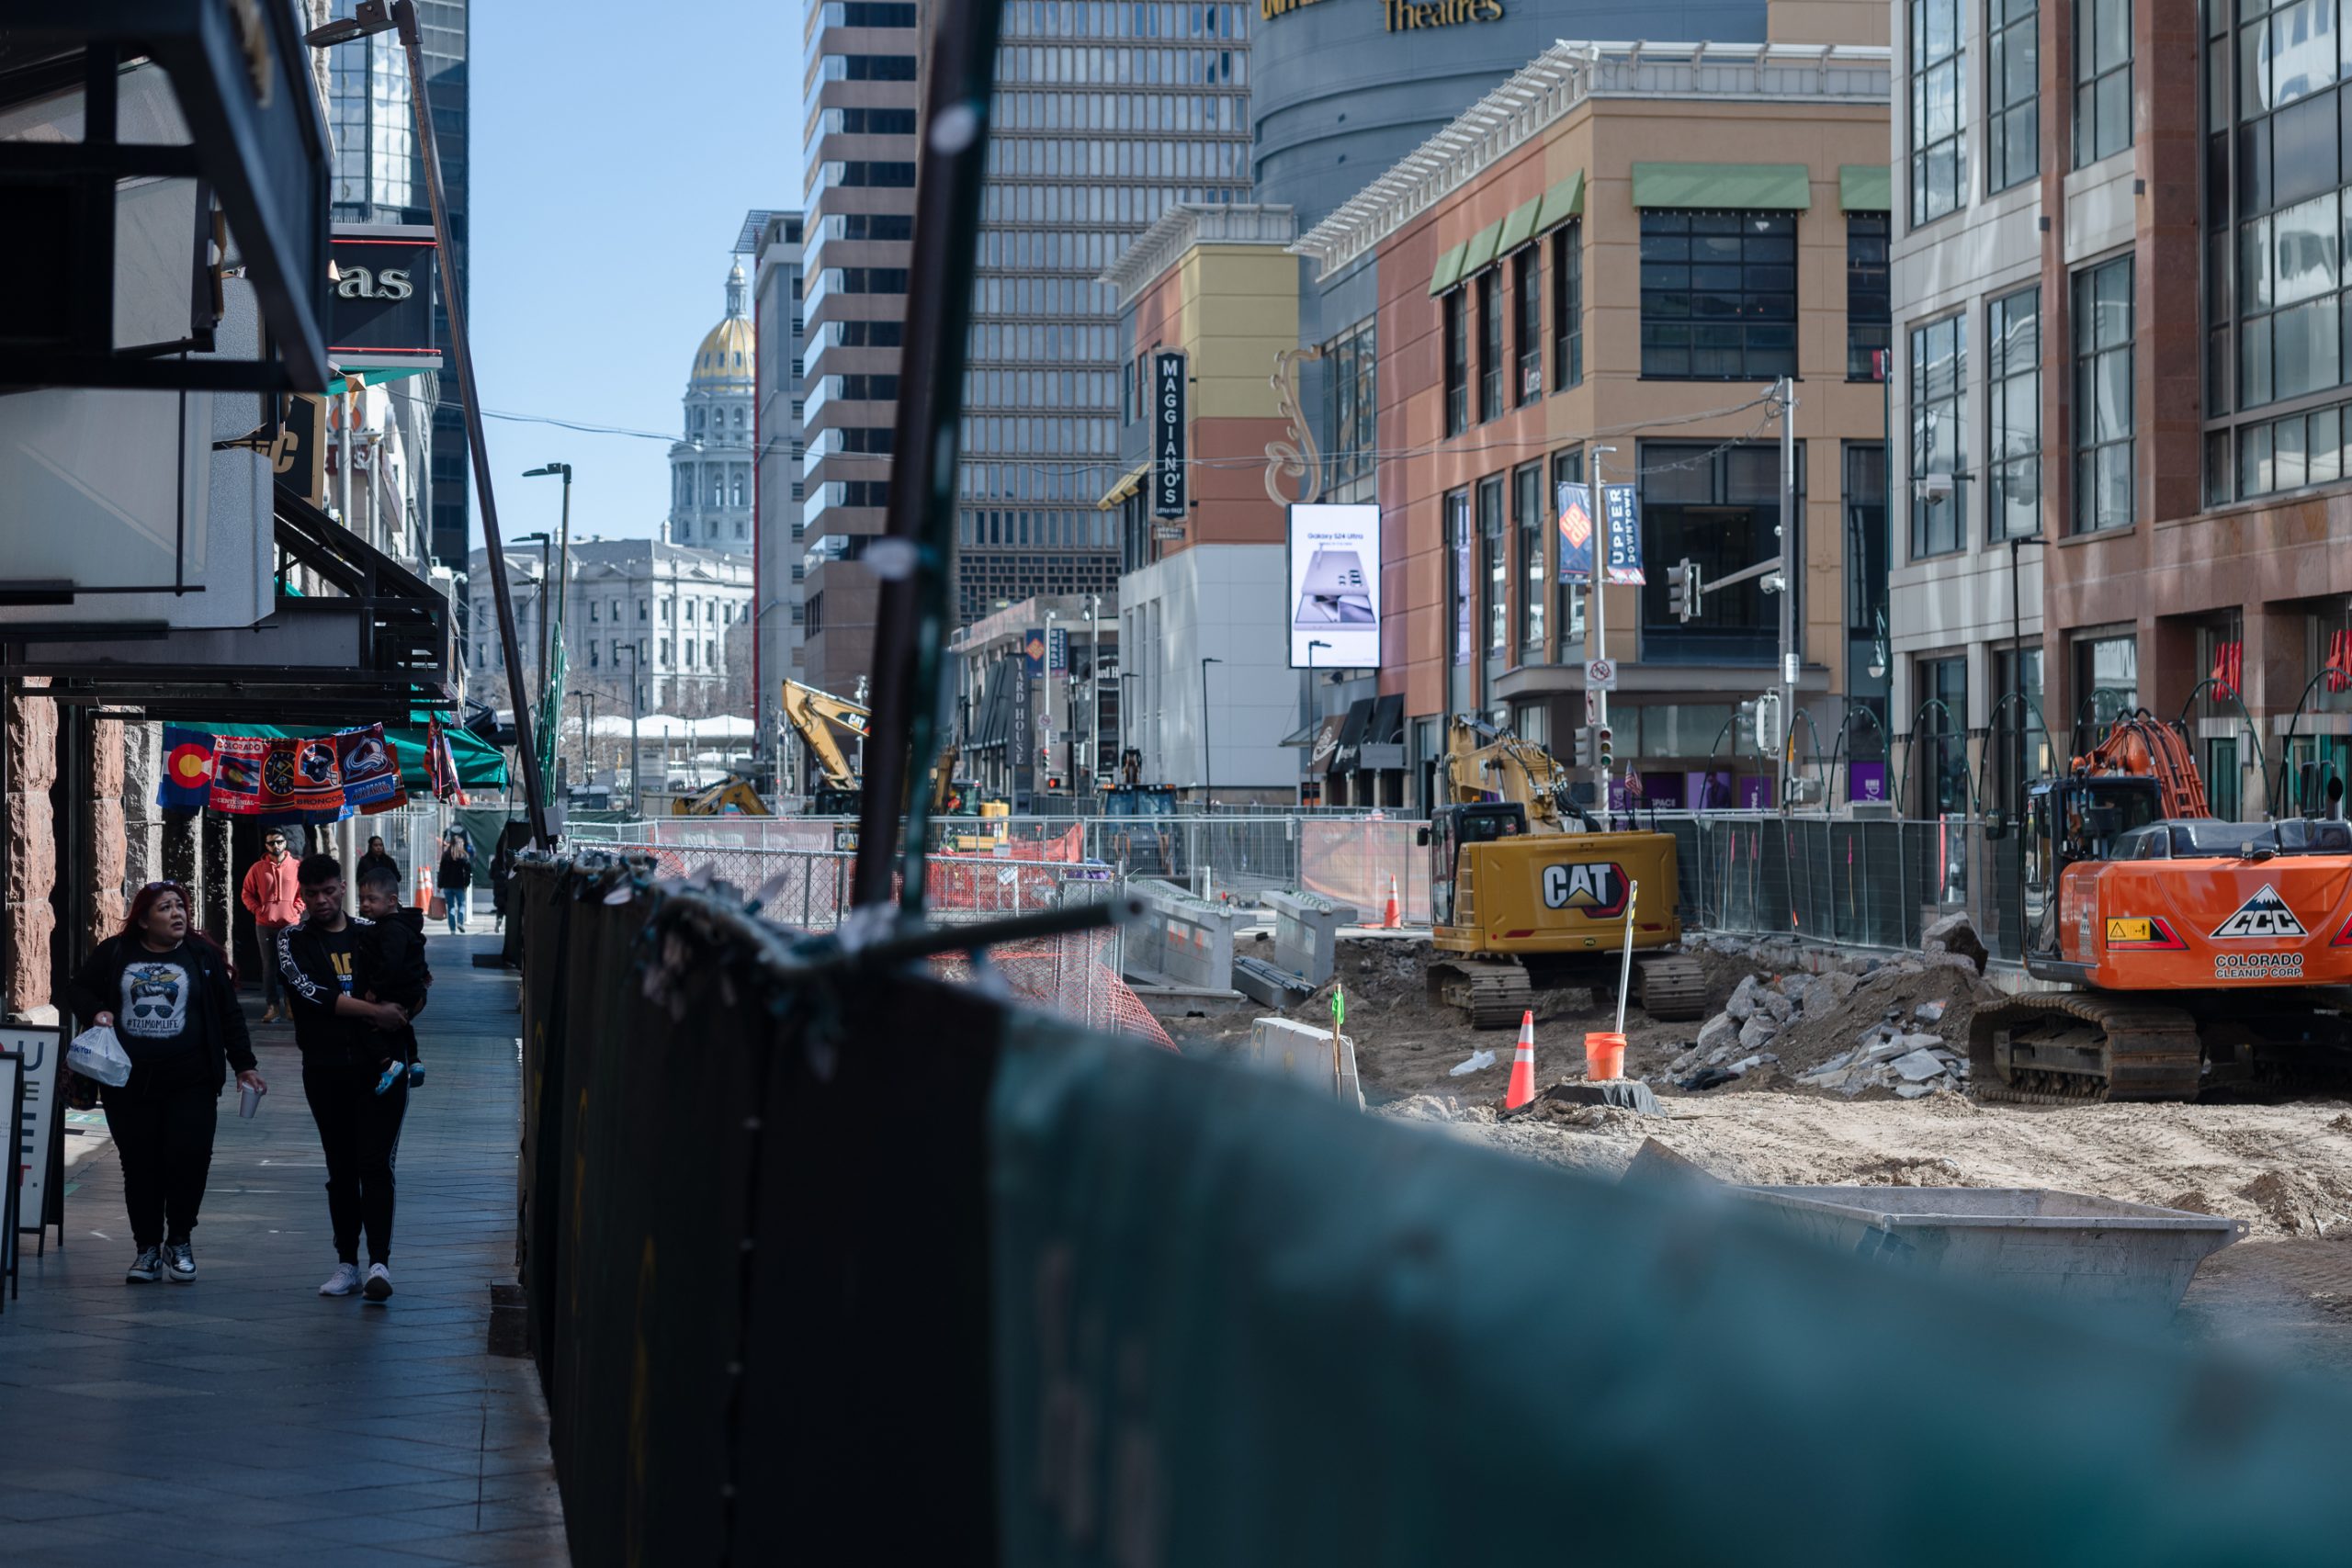 City street under construction with heavy machinery and barriers. People walking on the sidewalk to the left, buildings and a distant dome visible in the background.